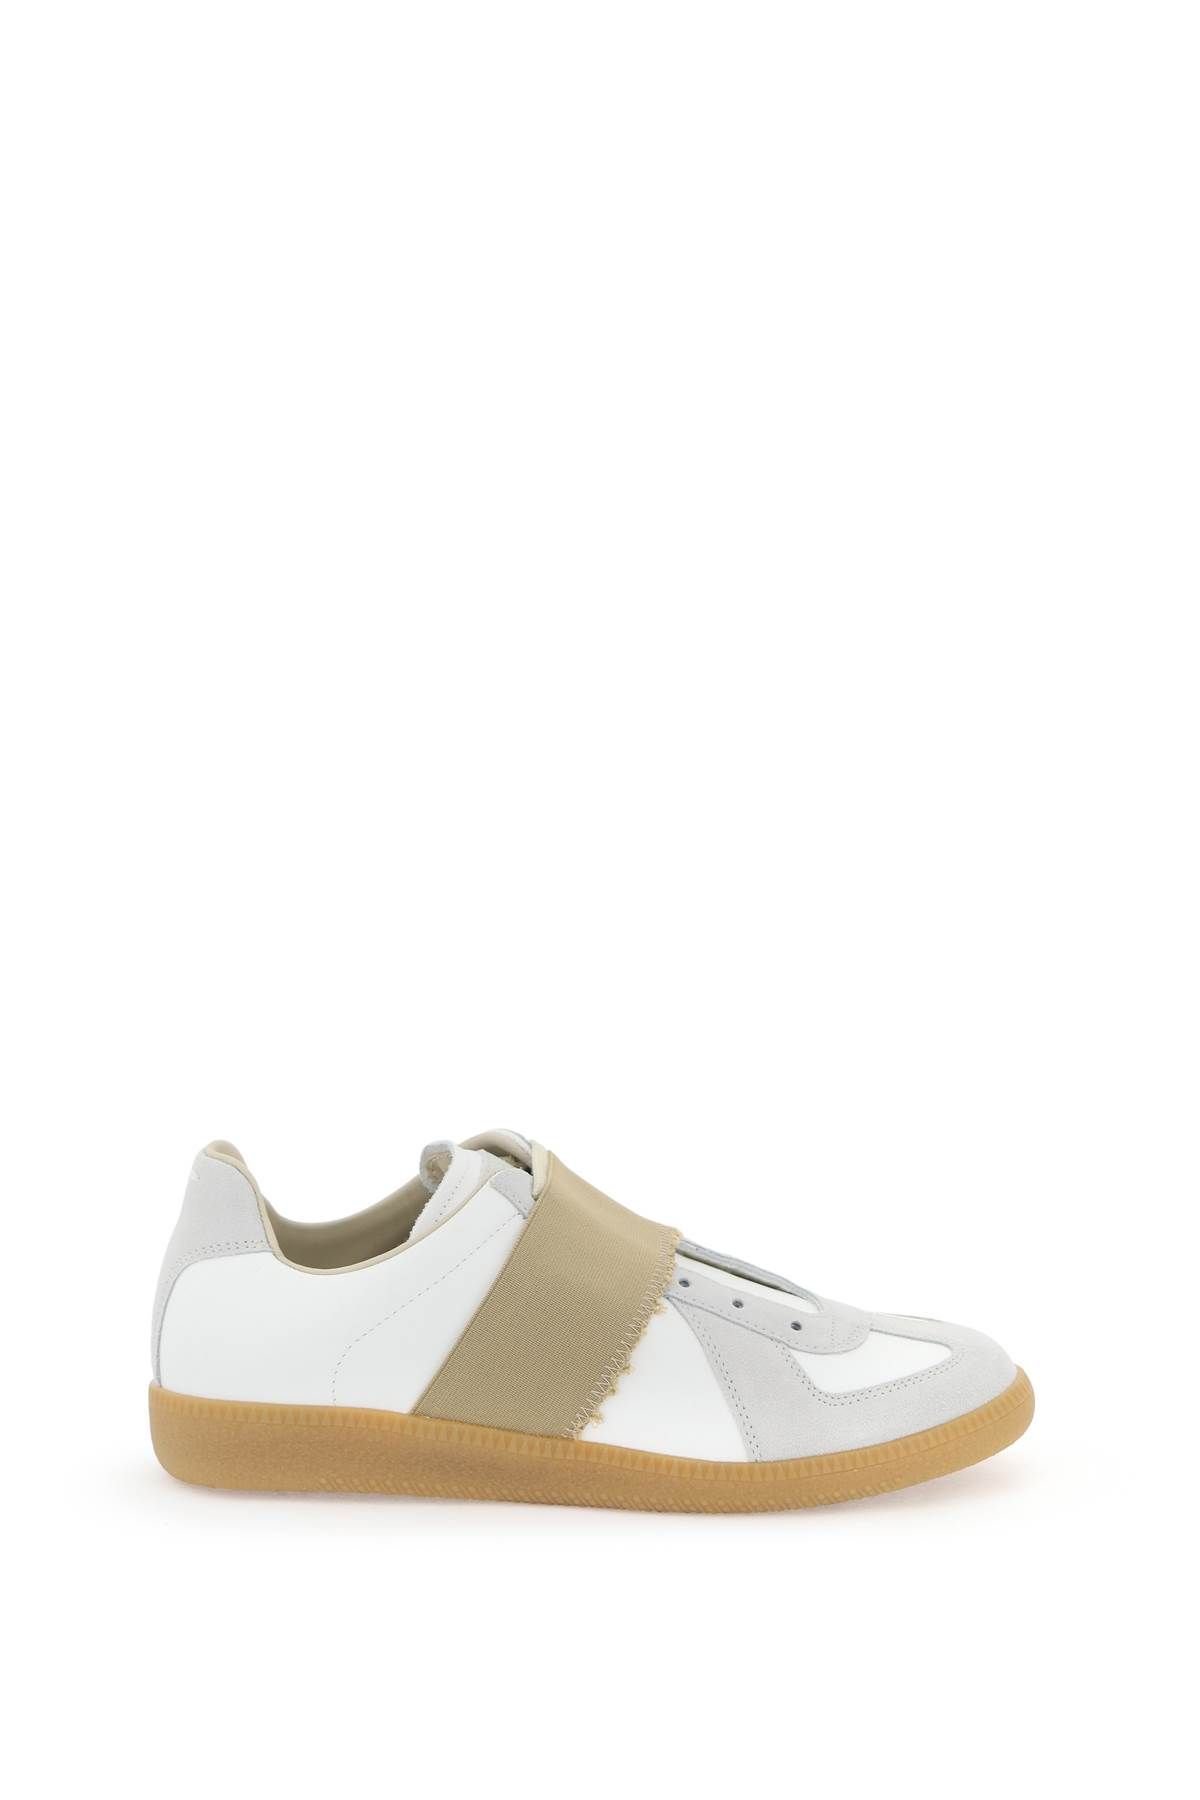 Shop Maison Margiela Replica Sneakers With Elastic Band In White